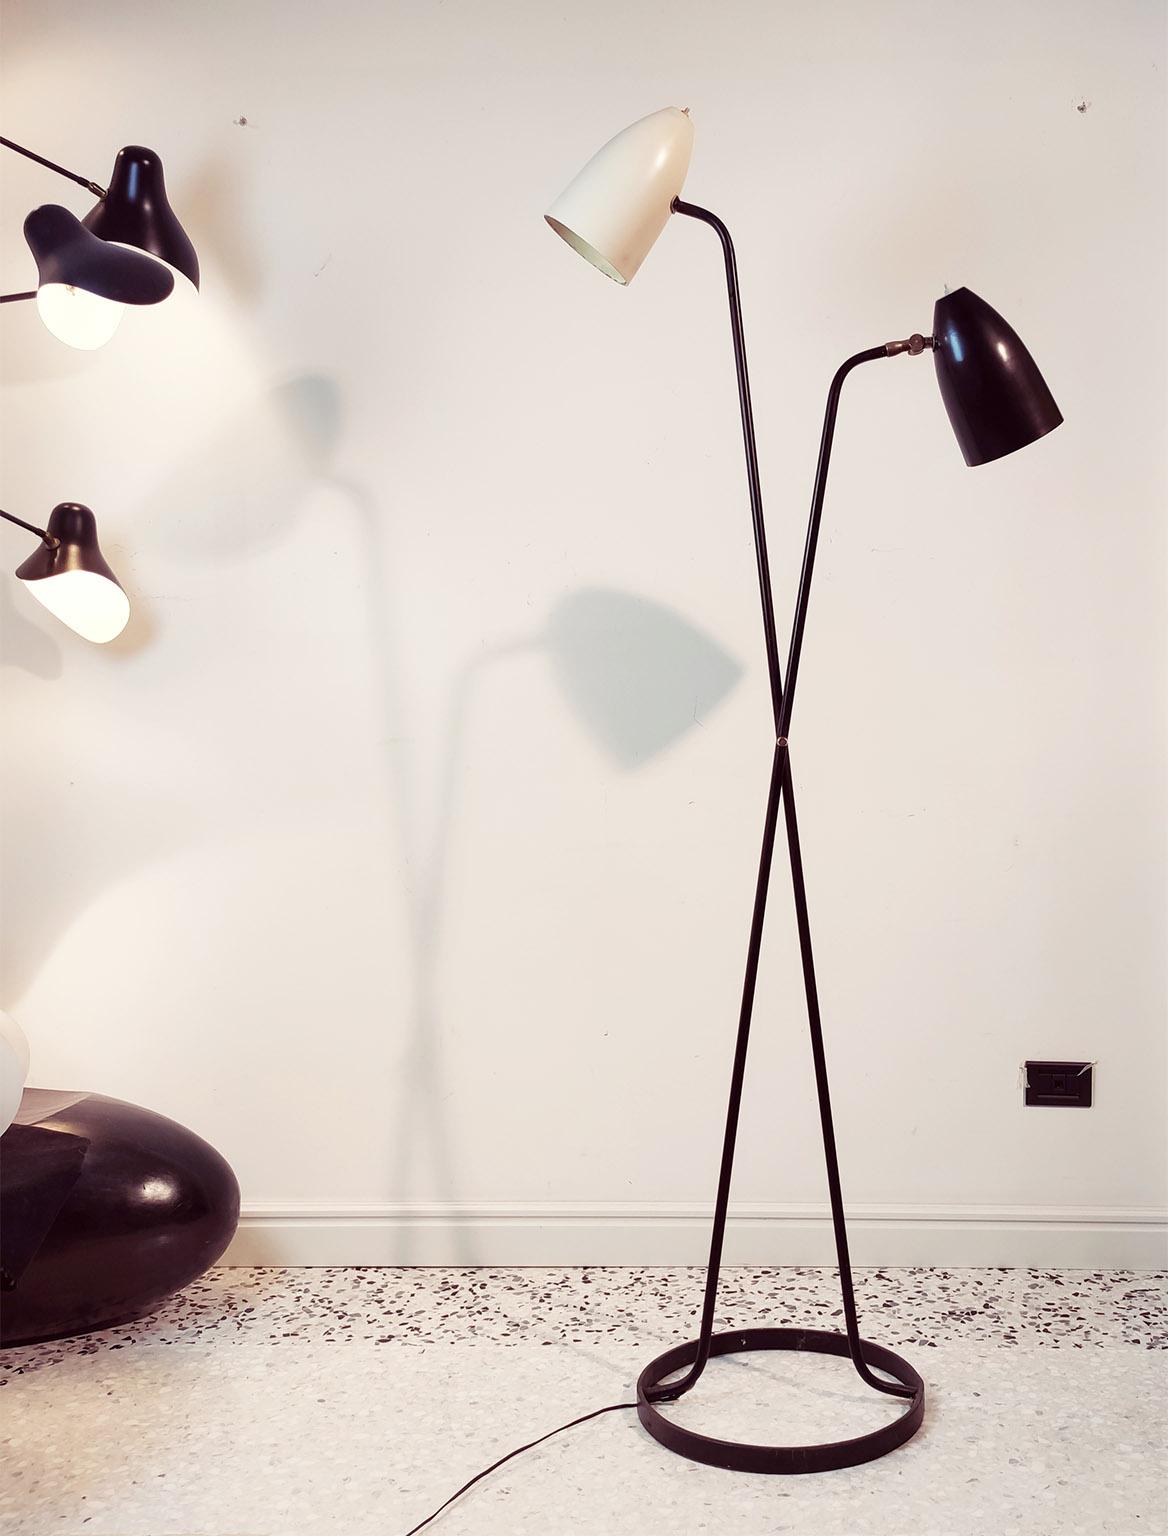 Lacquered Mid-Century Modern Large Black and White Floorlamp by Stilnovo, Milano, 1950s For Sale